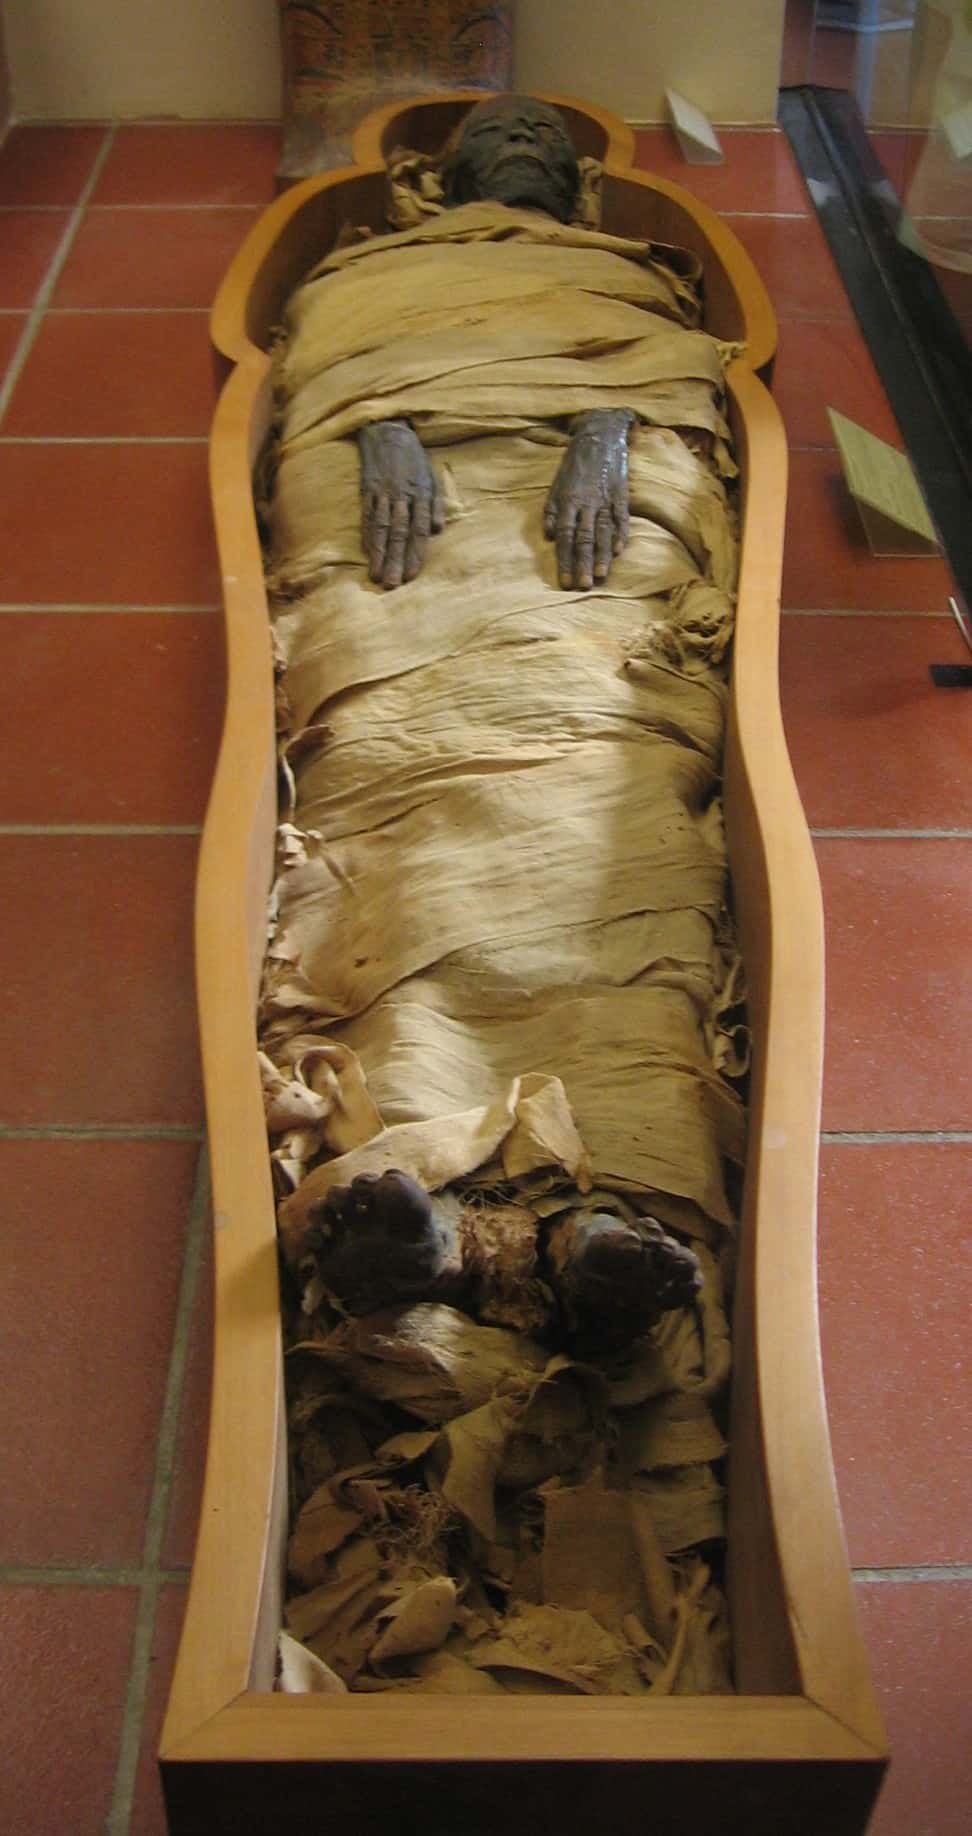 Mummy in Vatican Museums 2018031113 5aa52acb18e58